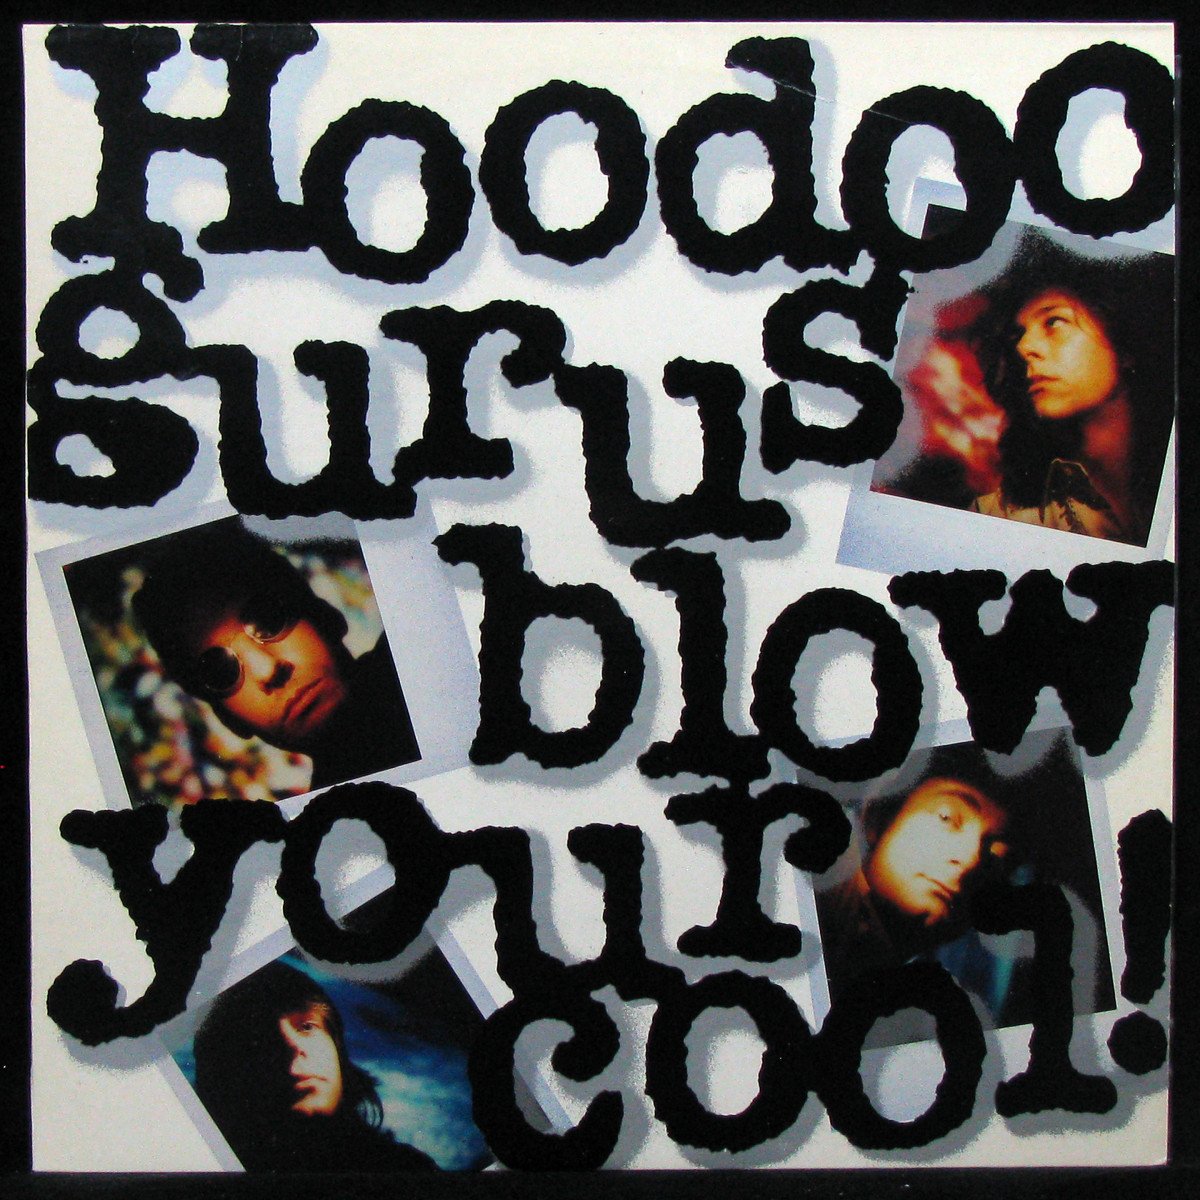 Blow Your Cool!